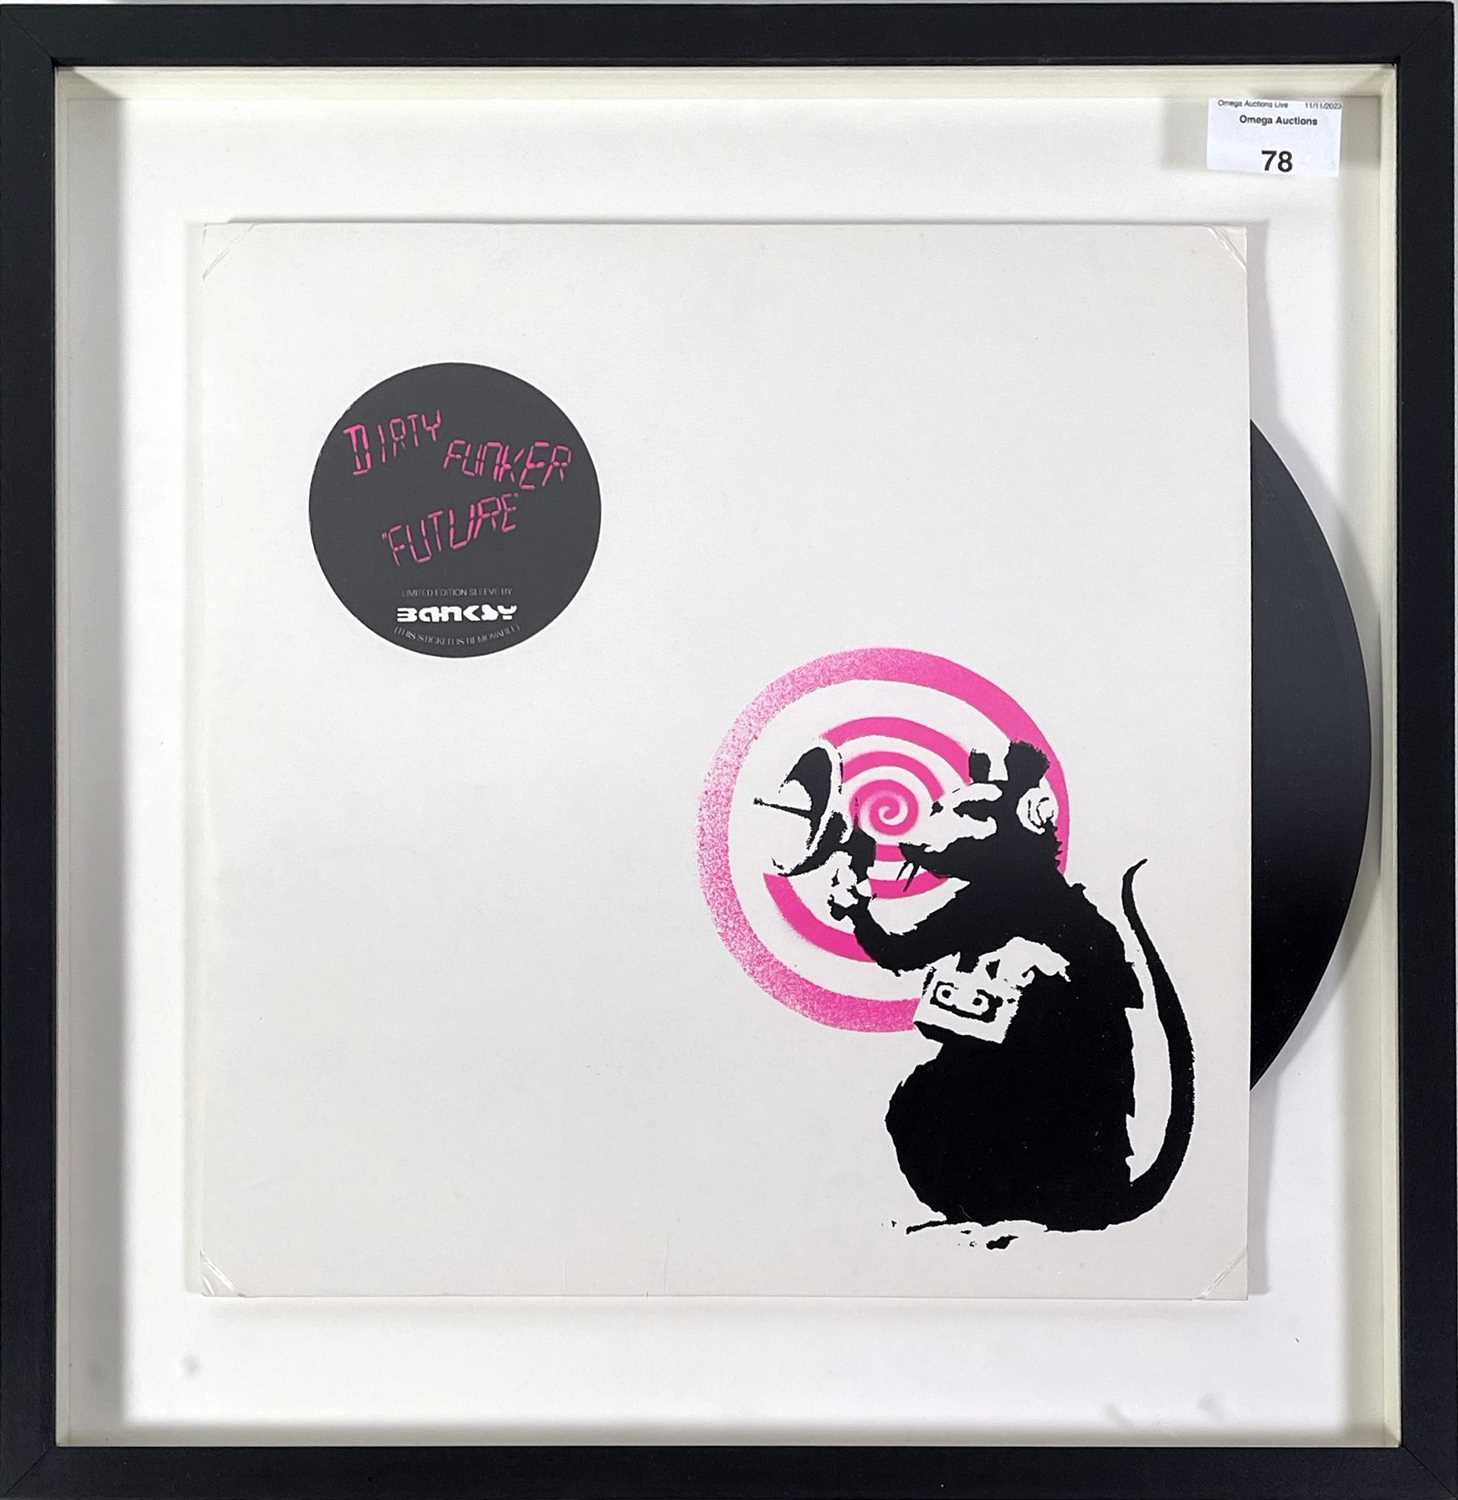 Lot 78 - DIRTY FUNKER - FUTURE 12" - BANKSY DESIGNED SLEEVE - 'WHITE AND PINK' DESIGN (SPIRIT RECORDINGS DF007)